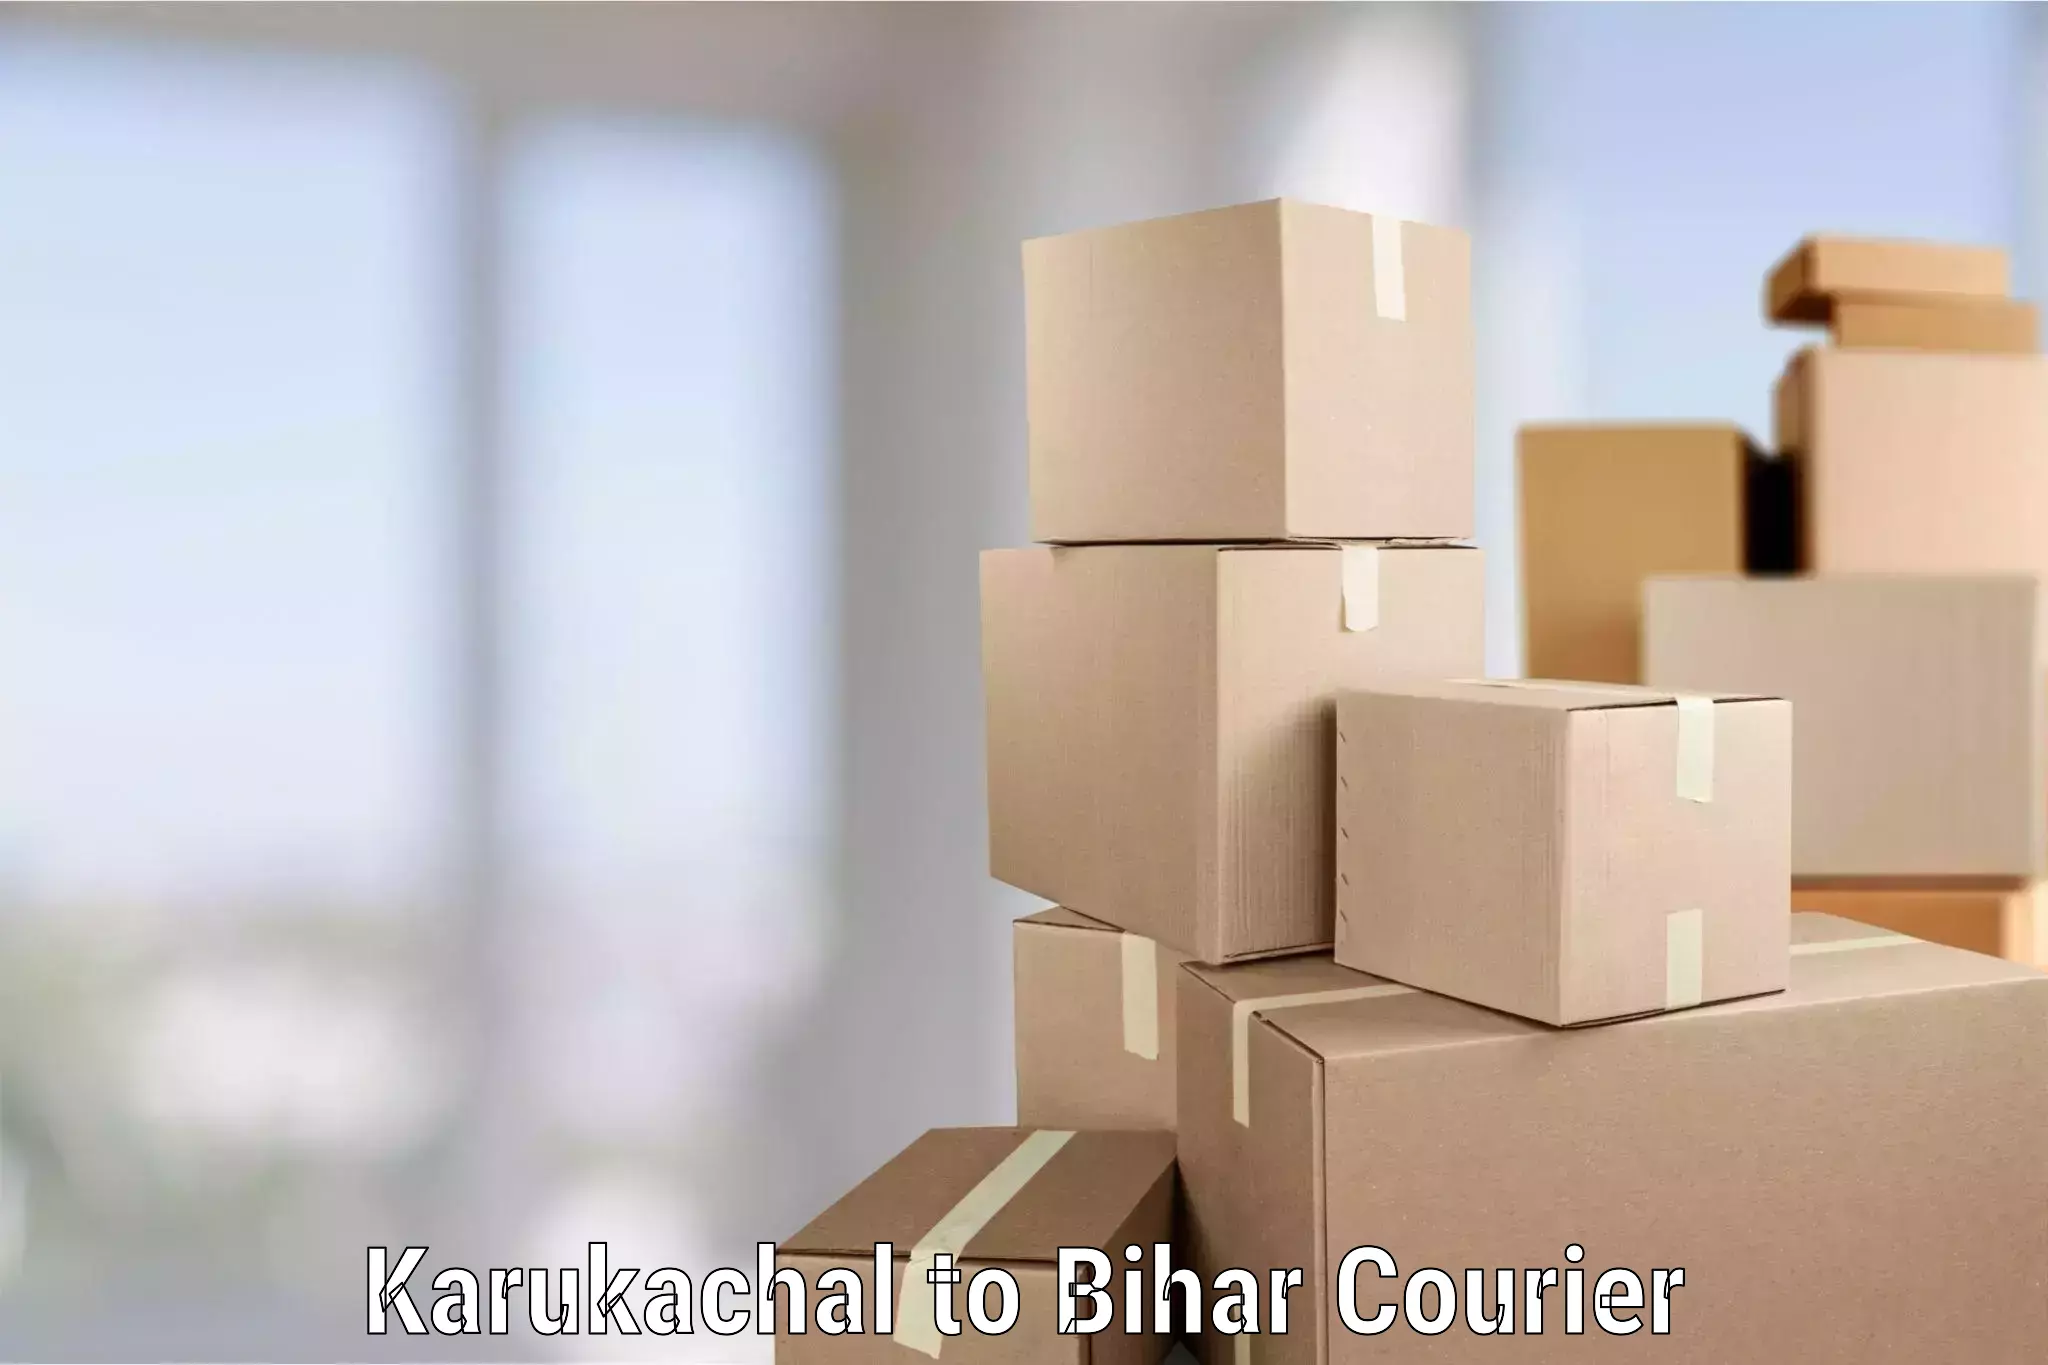 Professional relocation services in Karukachal to Jagdishpur Bhojpur